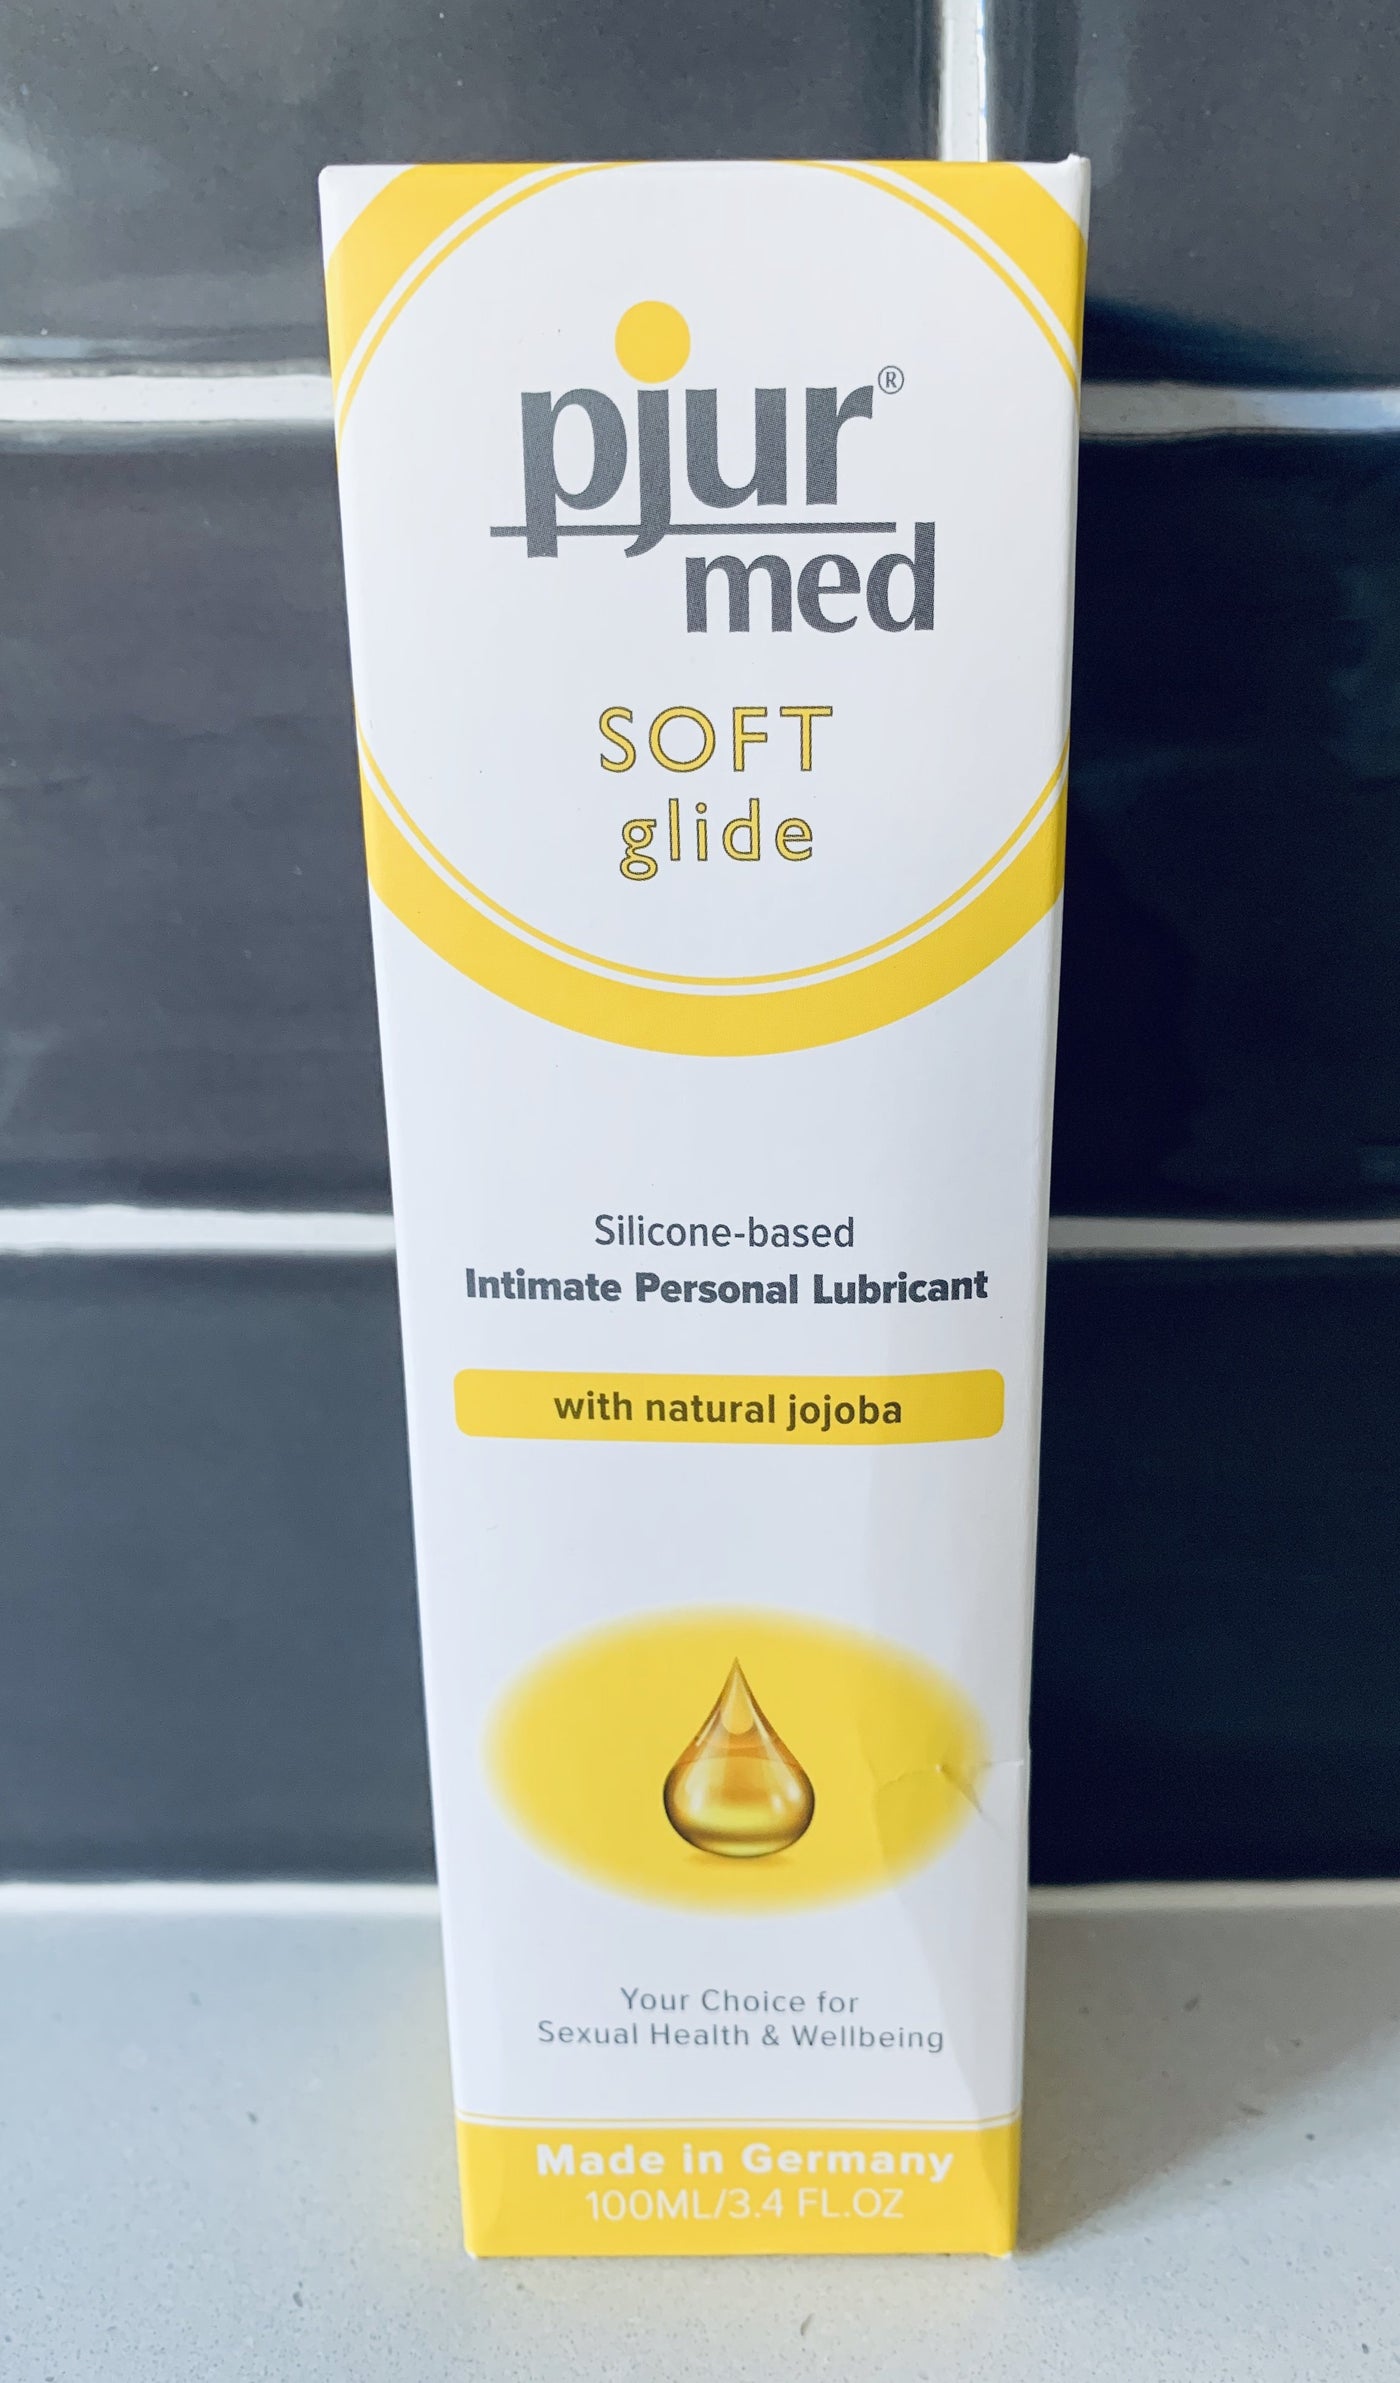 pjur®med SOFT glide Intimate Personal Lubricant 100mL